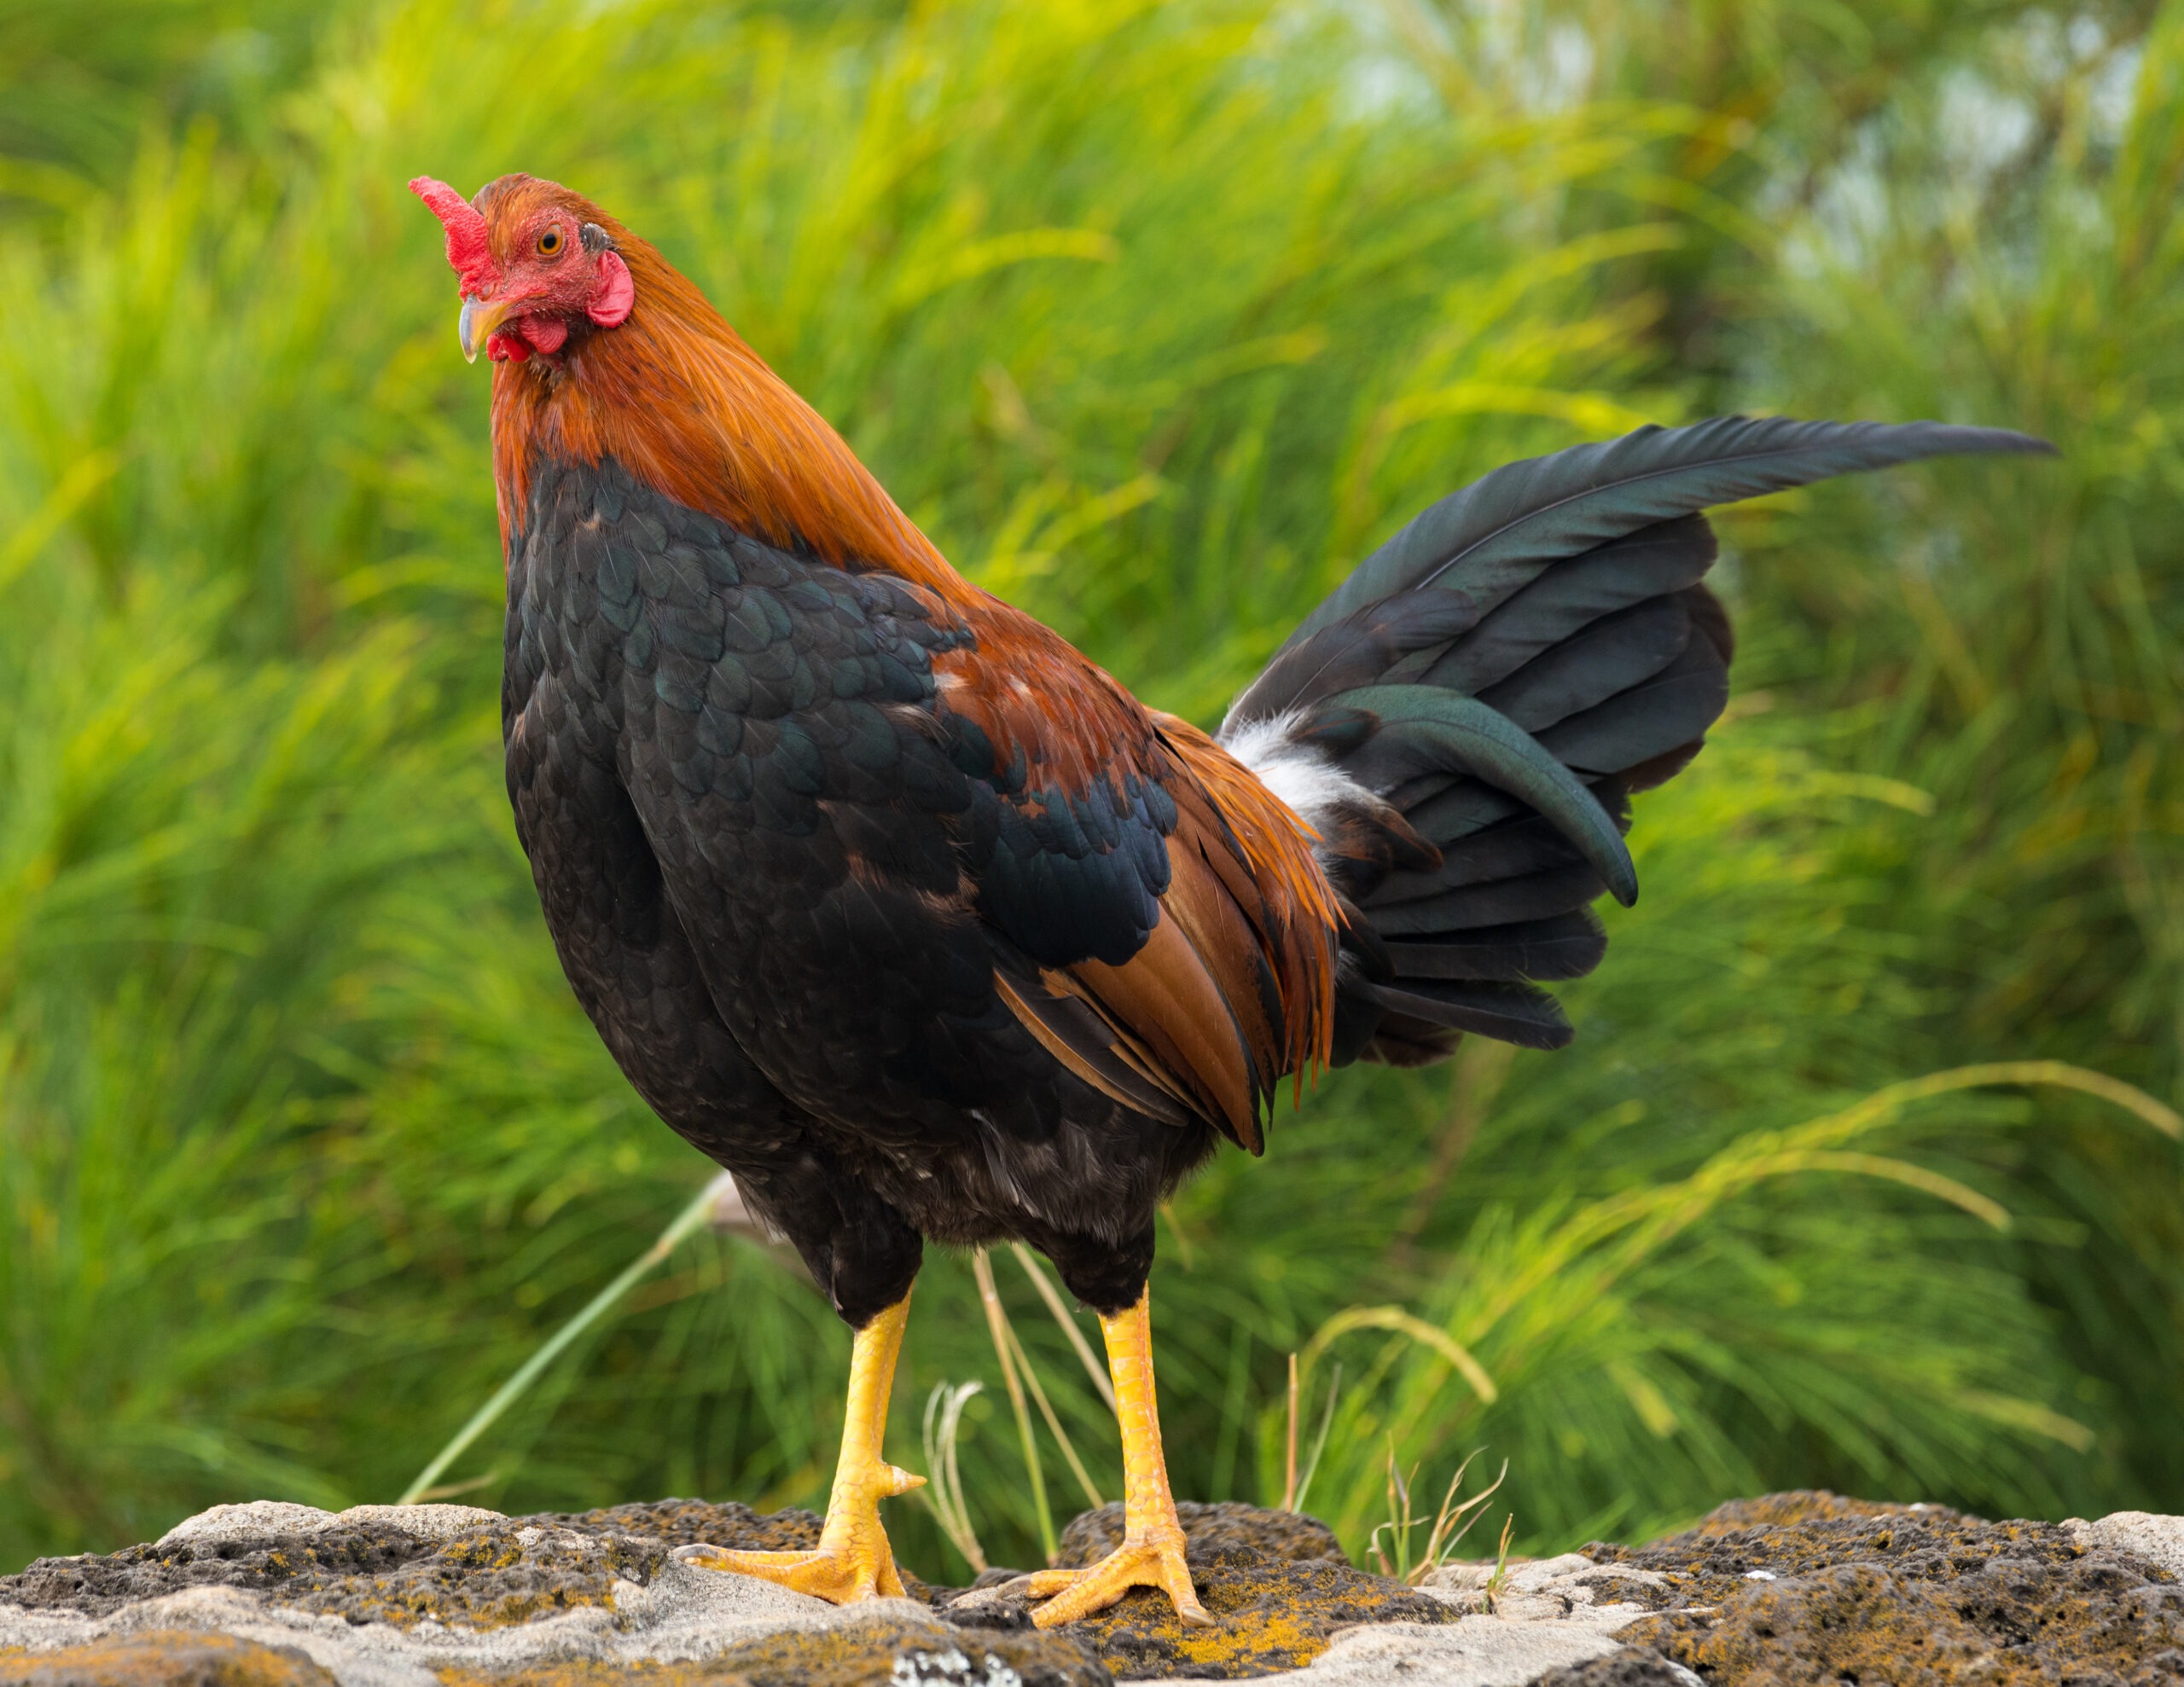 Do Chickens Fart? Answering an Age-Old Question